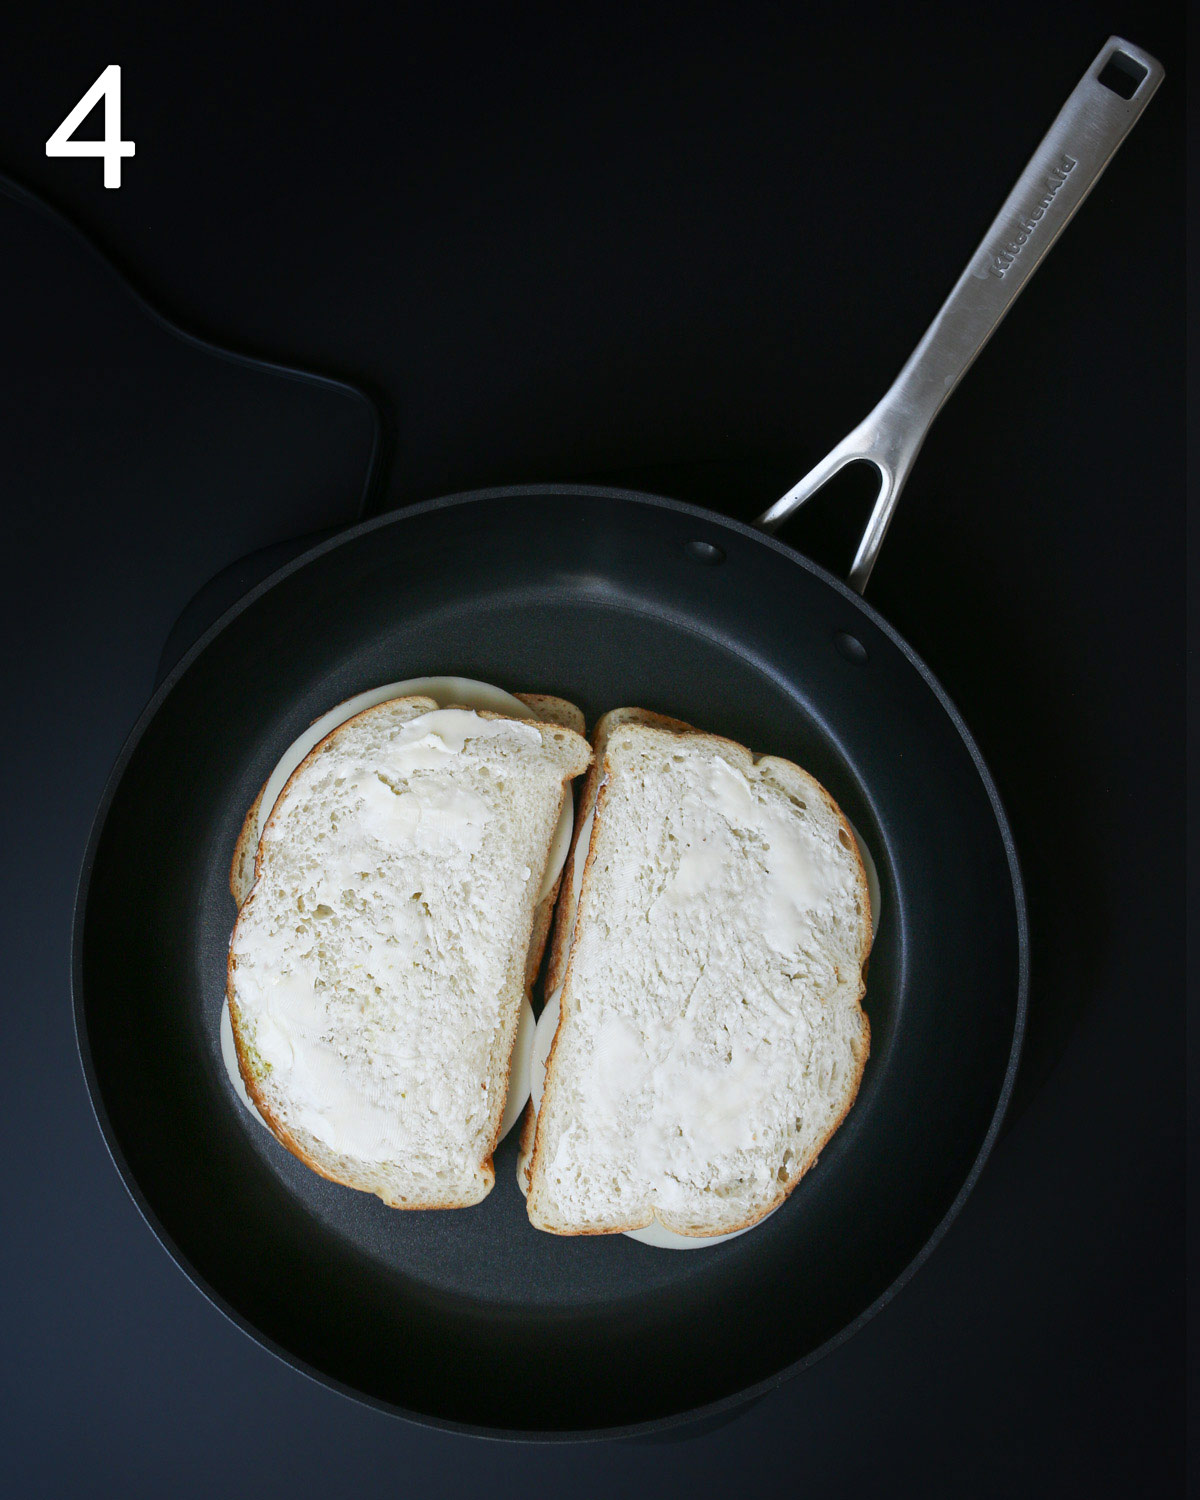 assembled sandwich in skillet with butter on the top side of the bread.